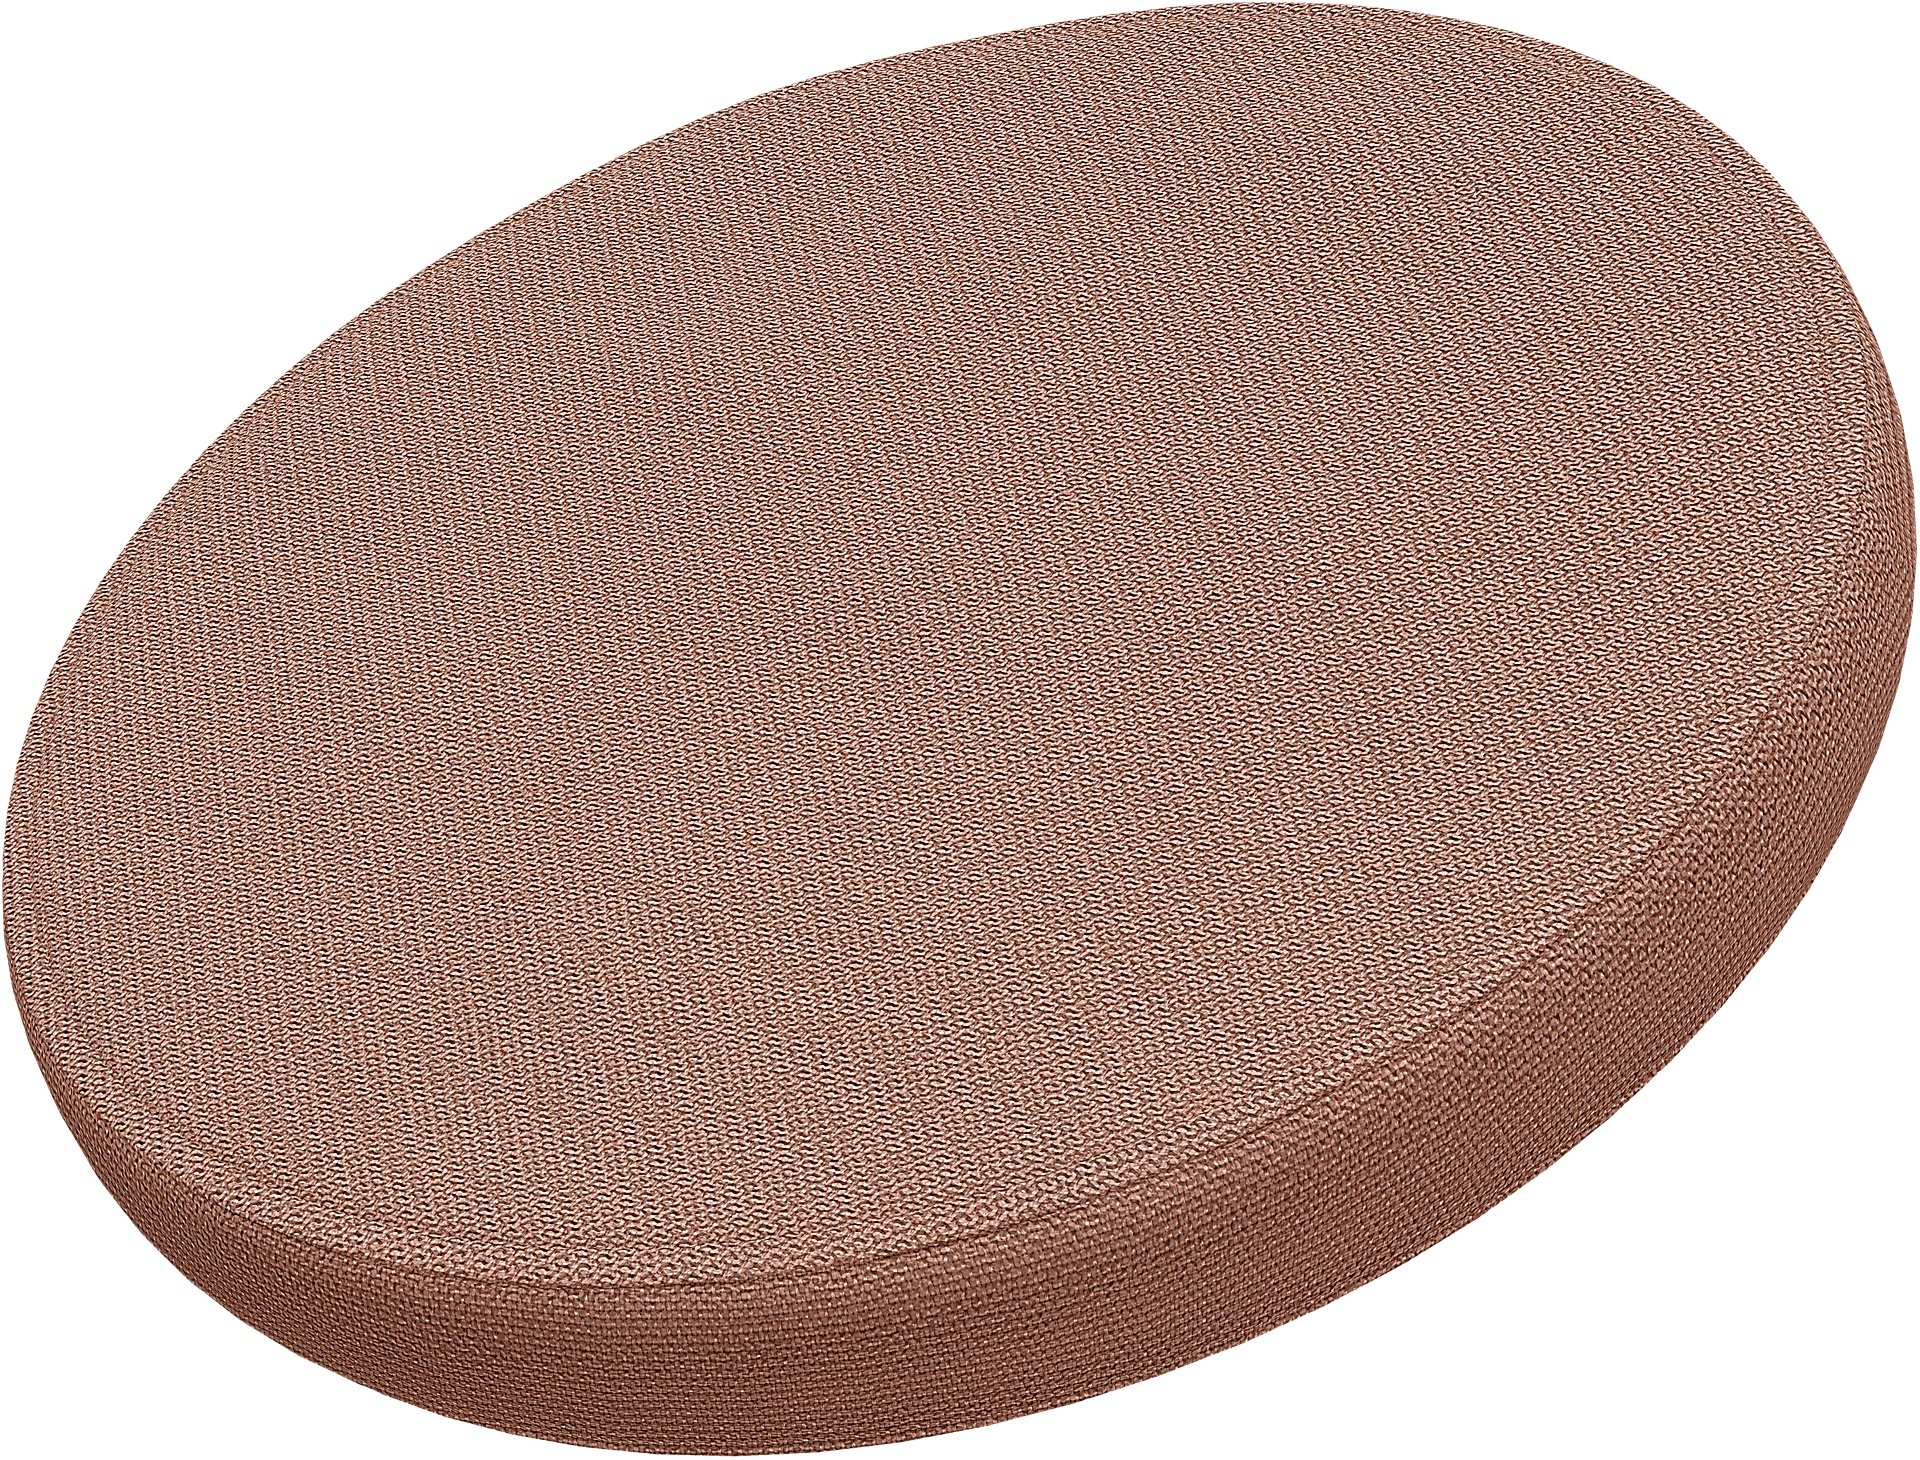 IKEA - Froson/Duvholmen Chair Seat Cushion Round Cover , Dusty Pink, Outdoor - Bemz